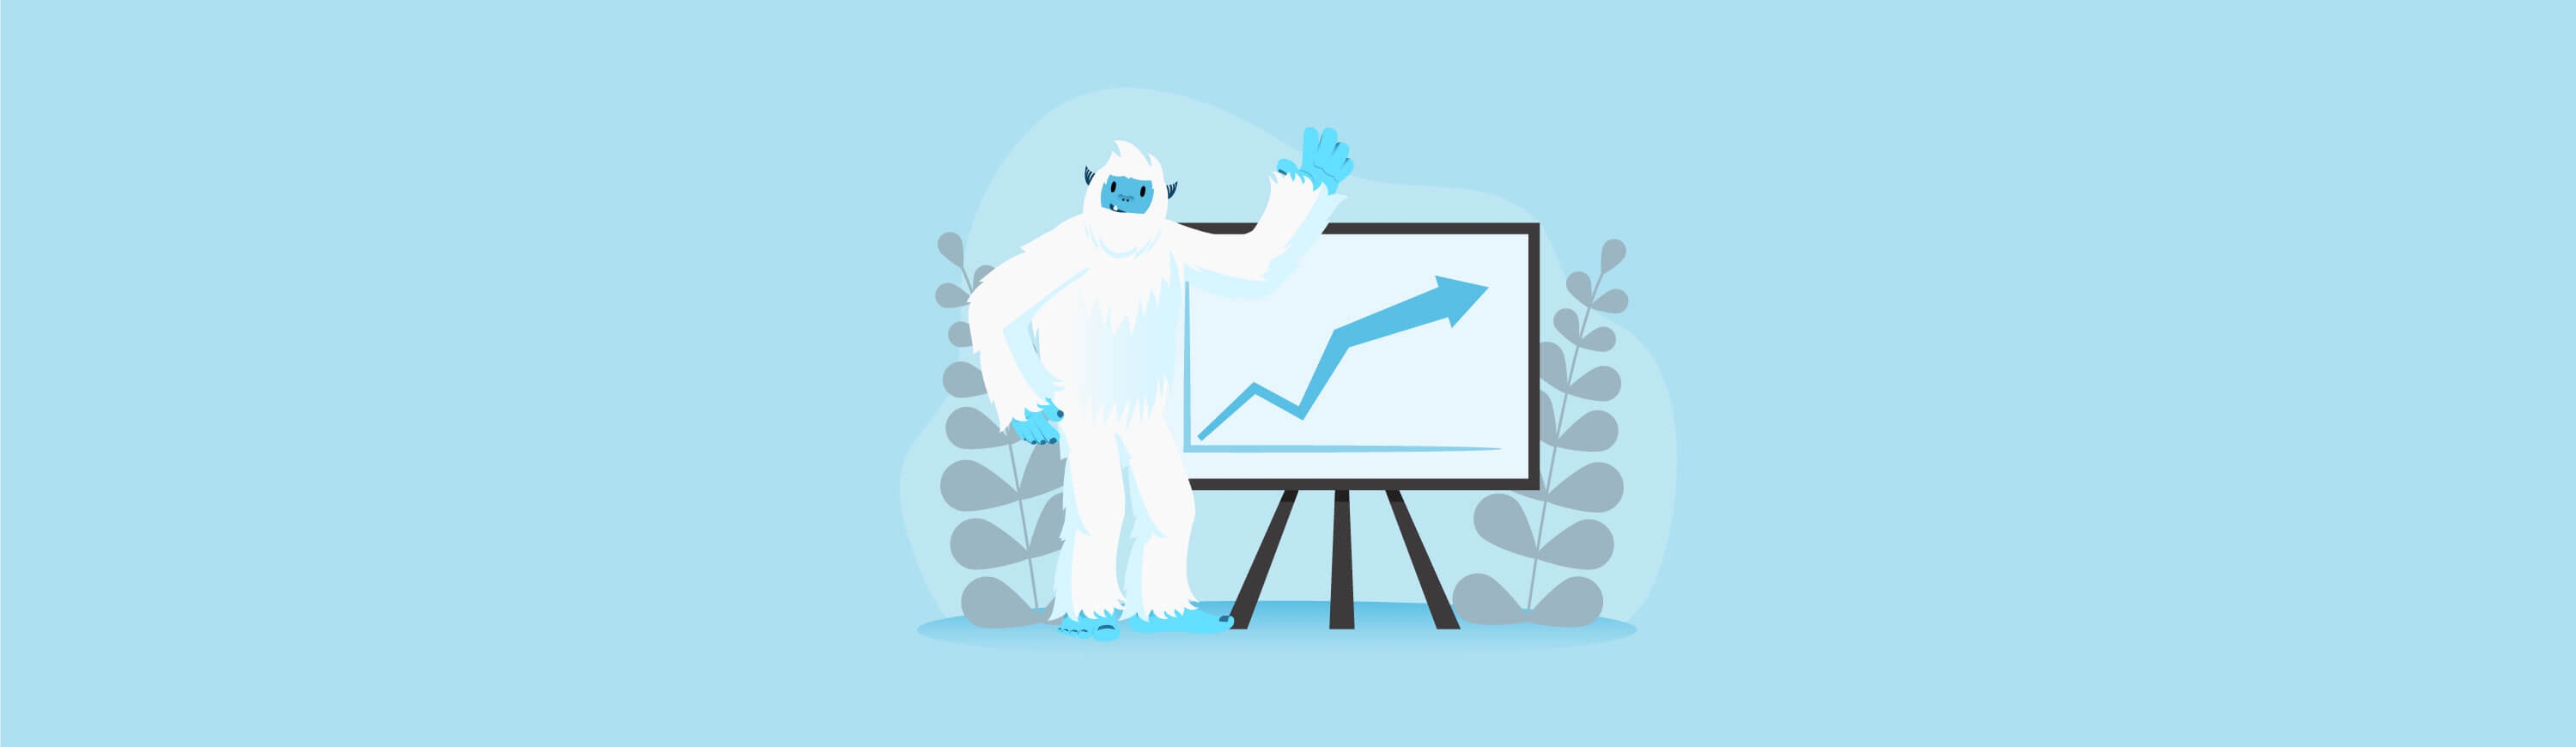 Illustration of Carl the yeti standing next to and pointing at a chart trending upwards.